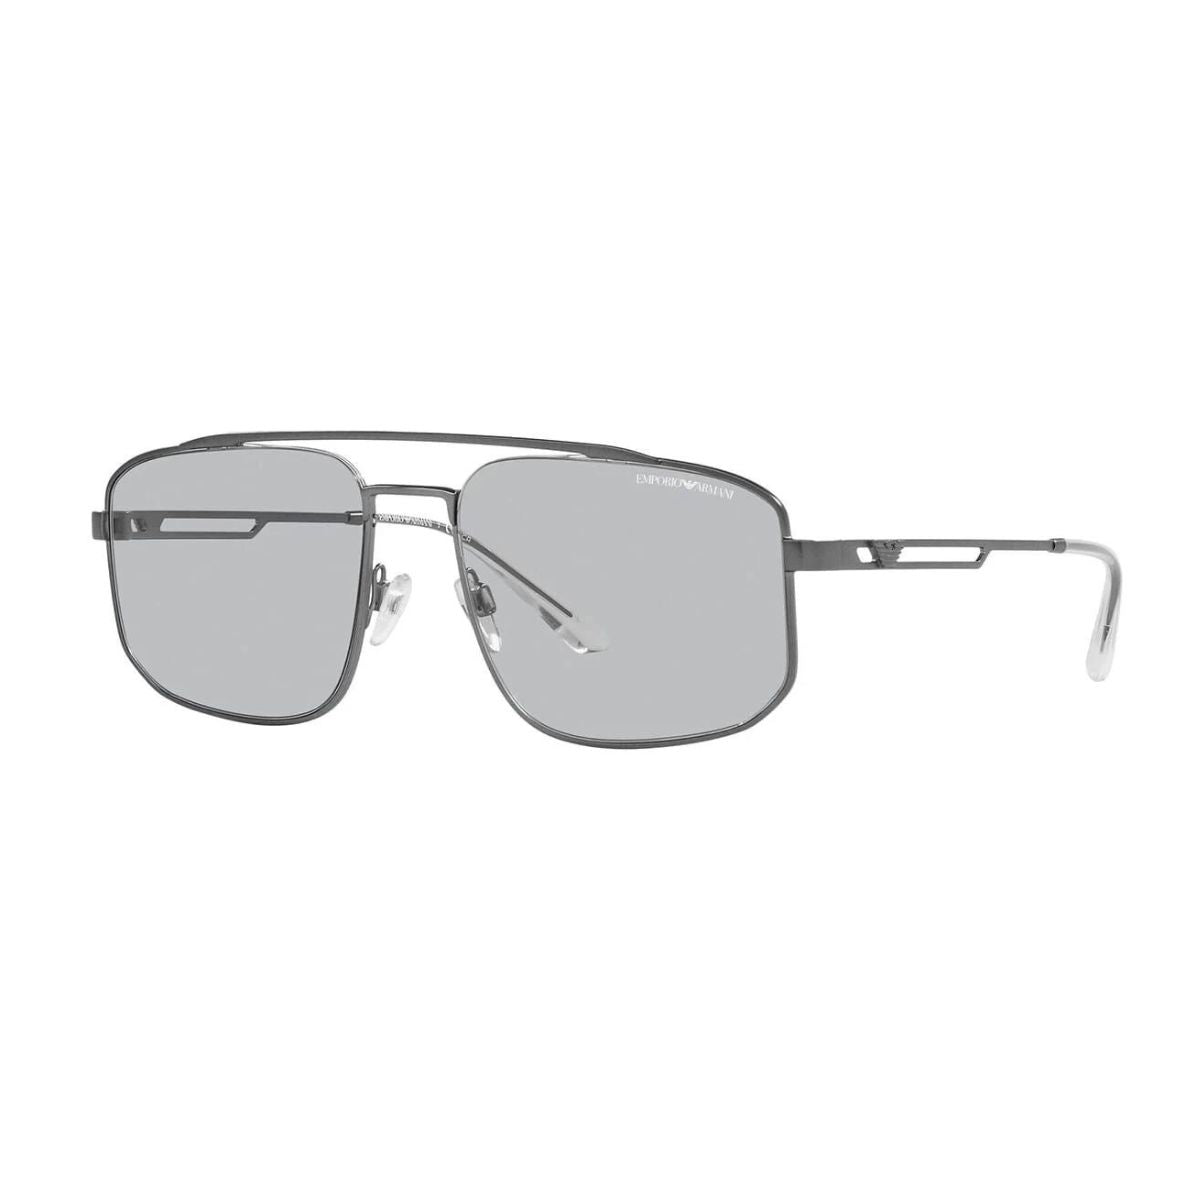 "Buy Emporio Armani EA 2139 3003/87 Rectangle sunglasses with UV Protection For Men's At Optorium"
